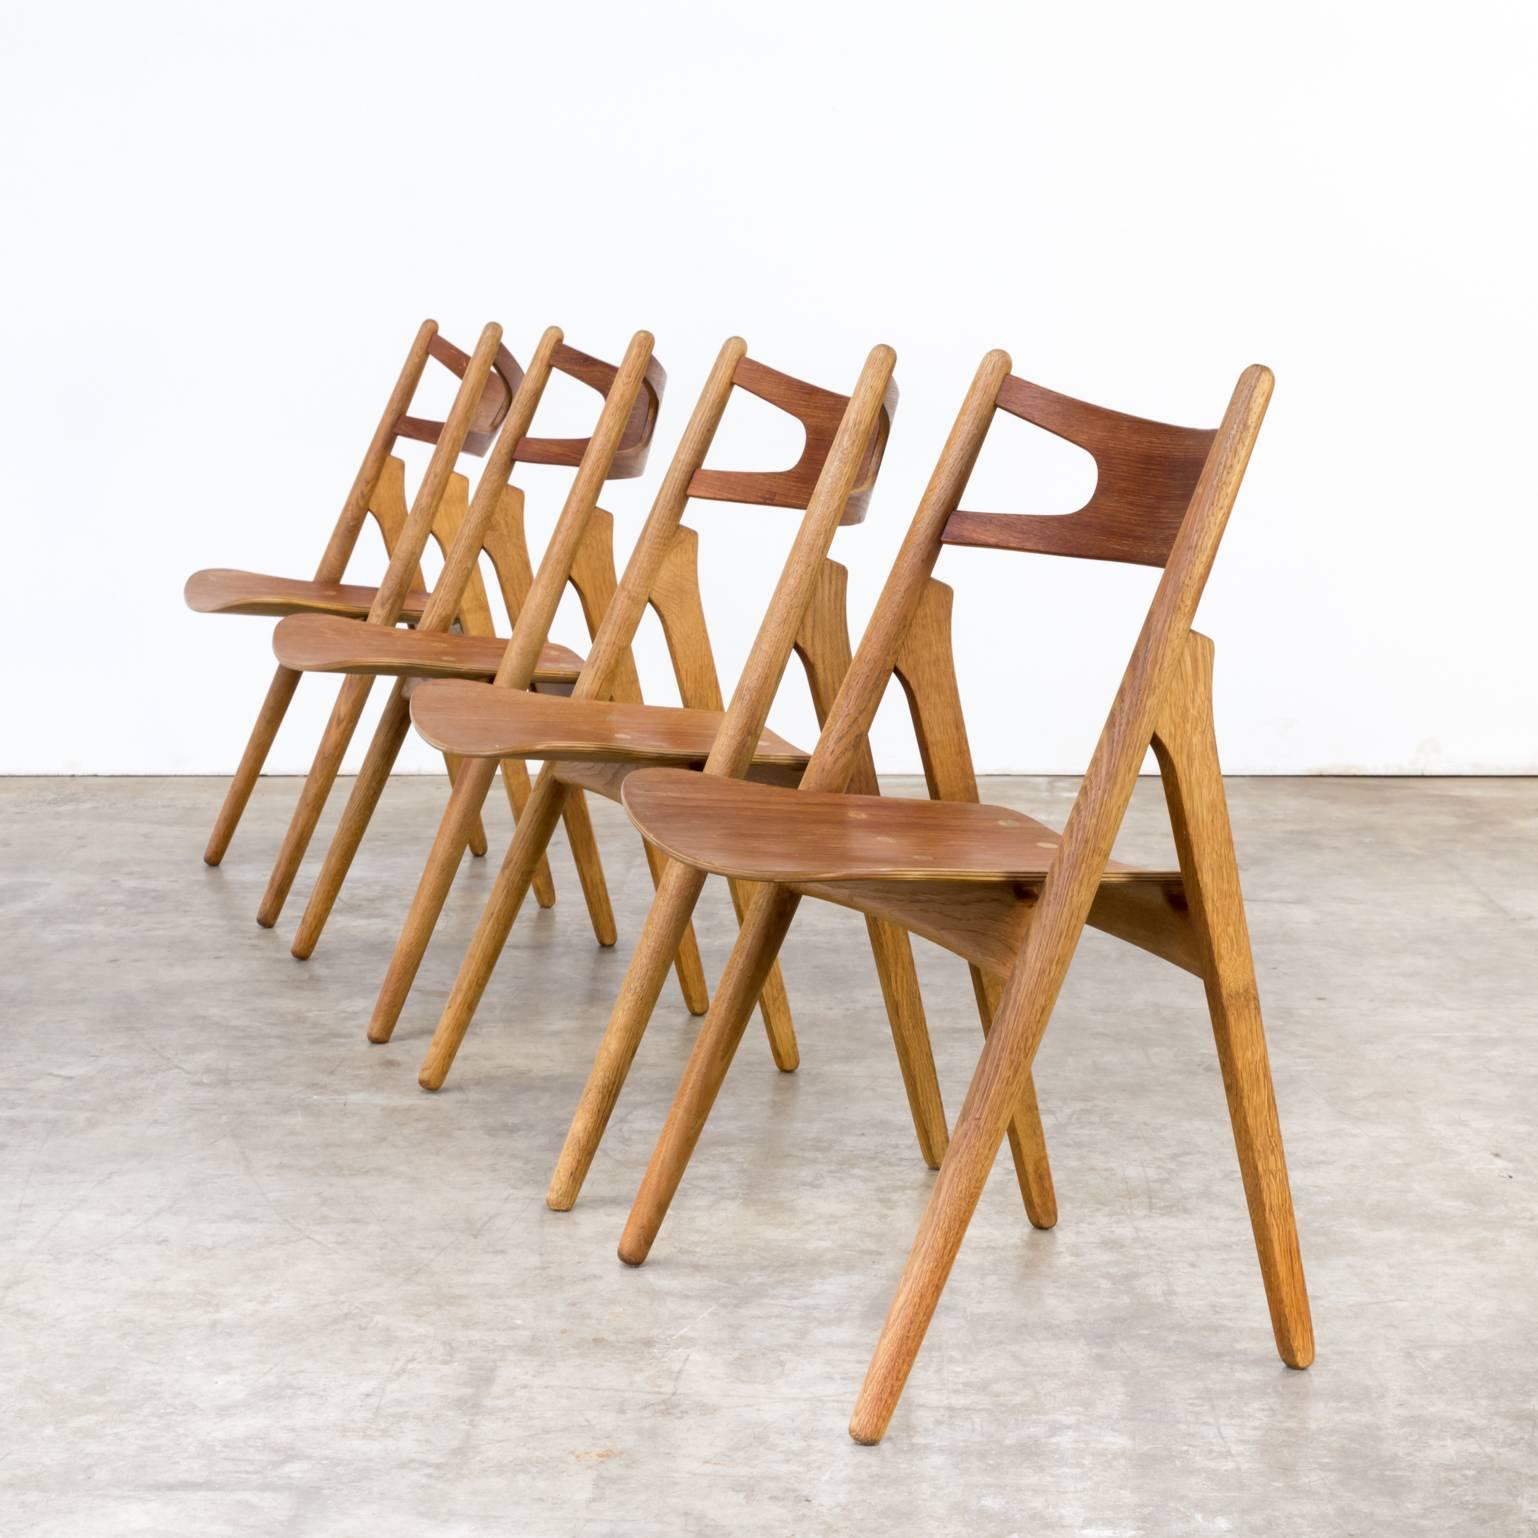 One set of four Hans Wegner ‘CH29 Sawback’ dining chairs for Carl Hansen & Son. Beautiful iconic designed CH29 set, partly restored. Good condition wear consistent with age and use.